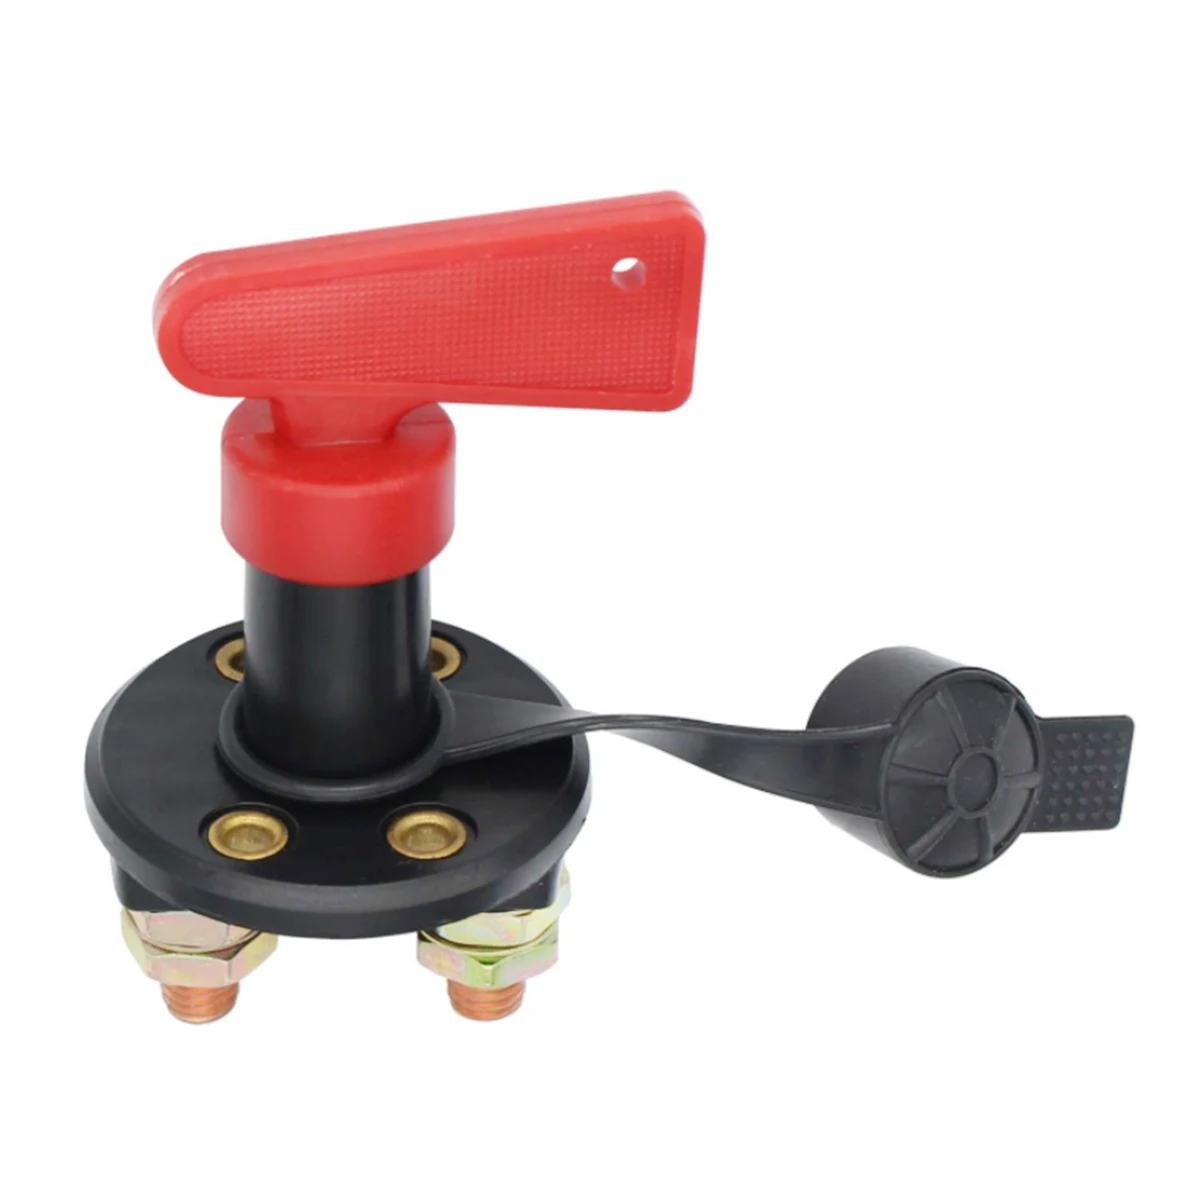 

12V Car Truck Boat Battery Isolator Disconnect Cut Off Power Switch 300 AMPS for home and automotive